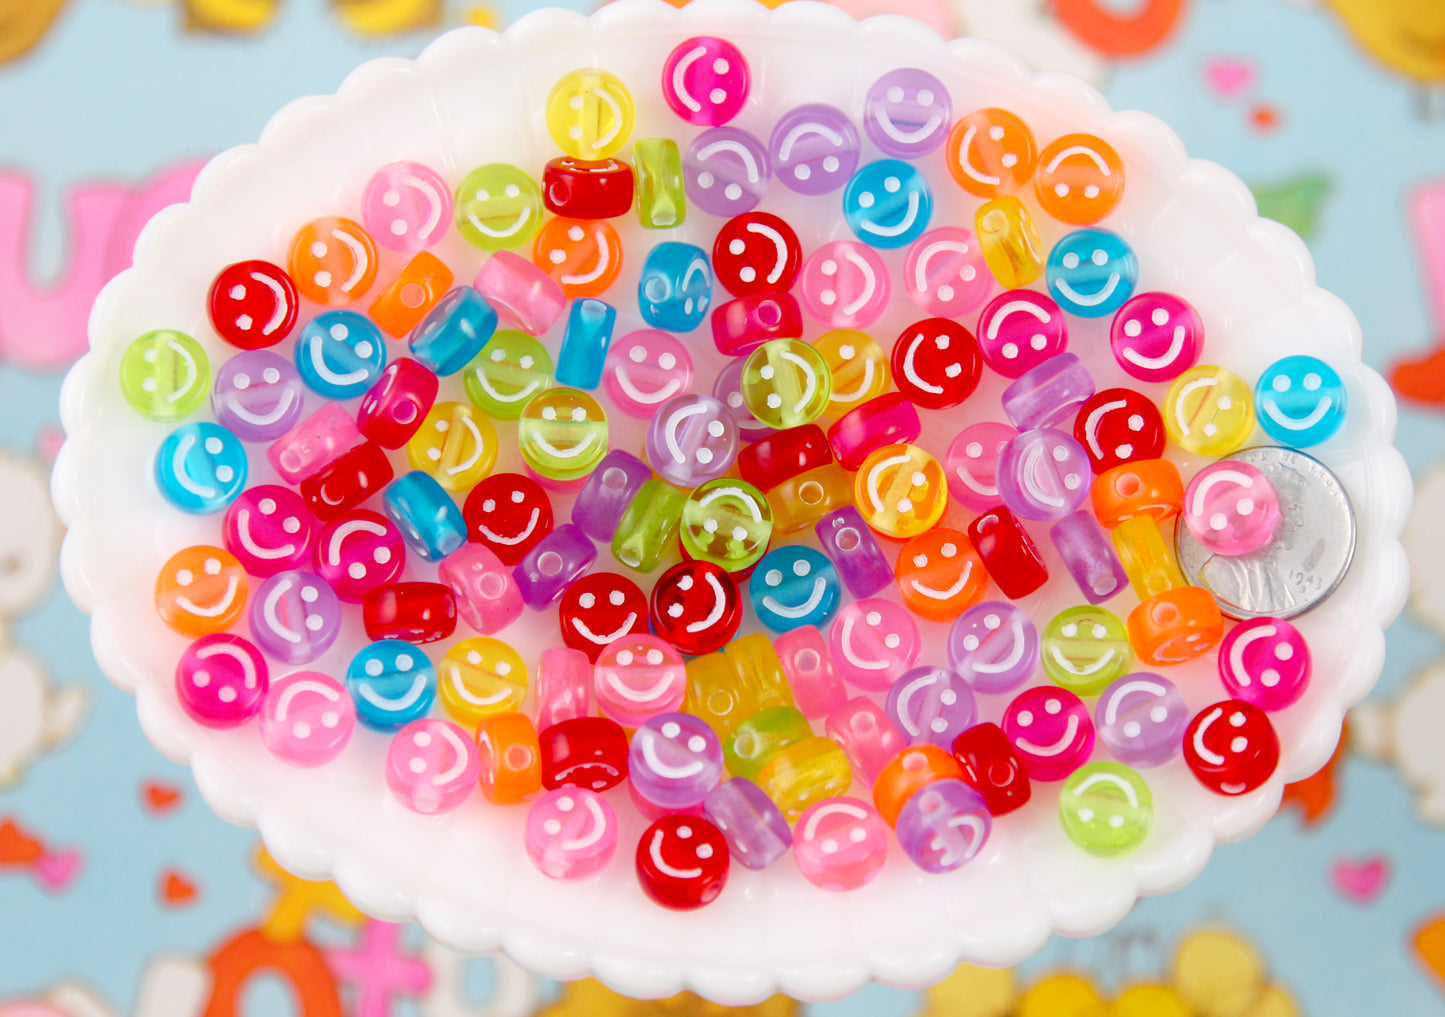 Happy Face Beads - 10mm Translucent Smile Shape Acrylic or Resin Beads - 100 pc set